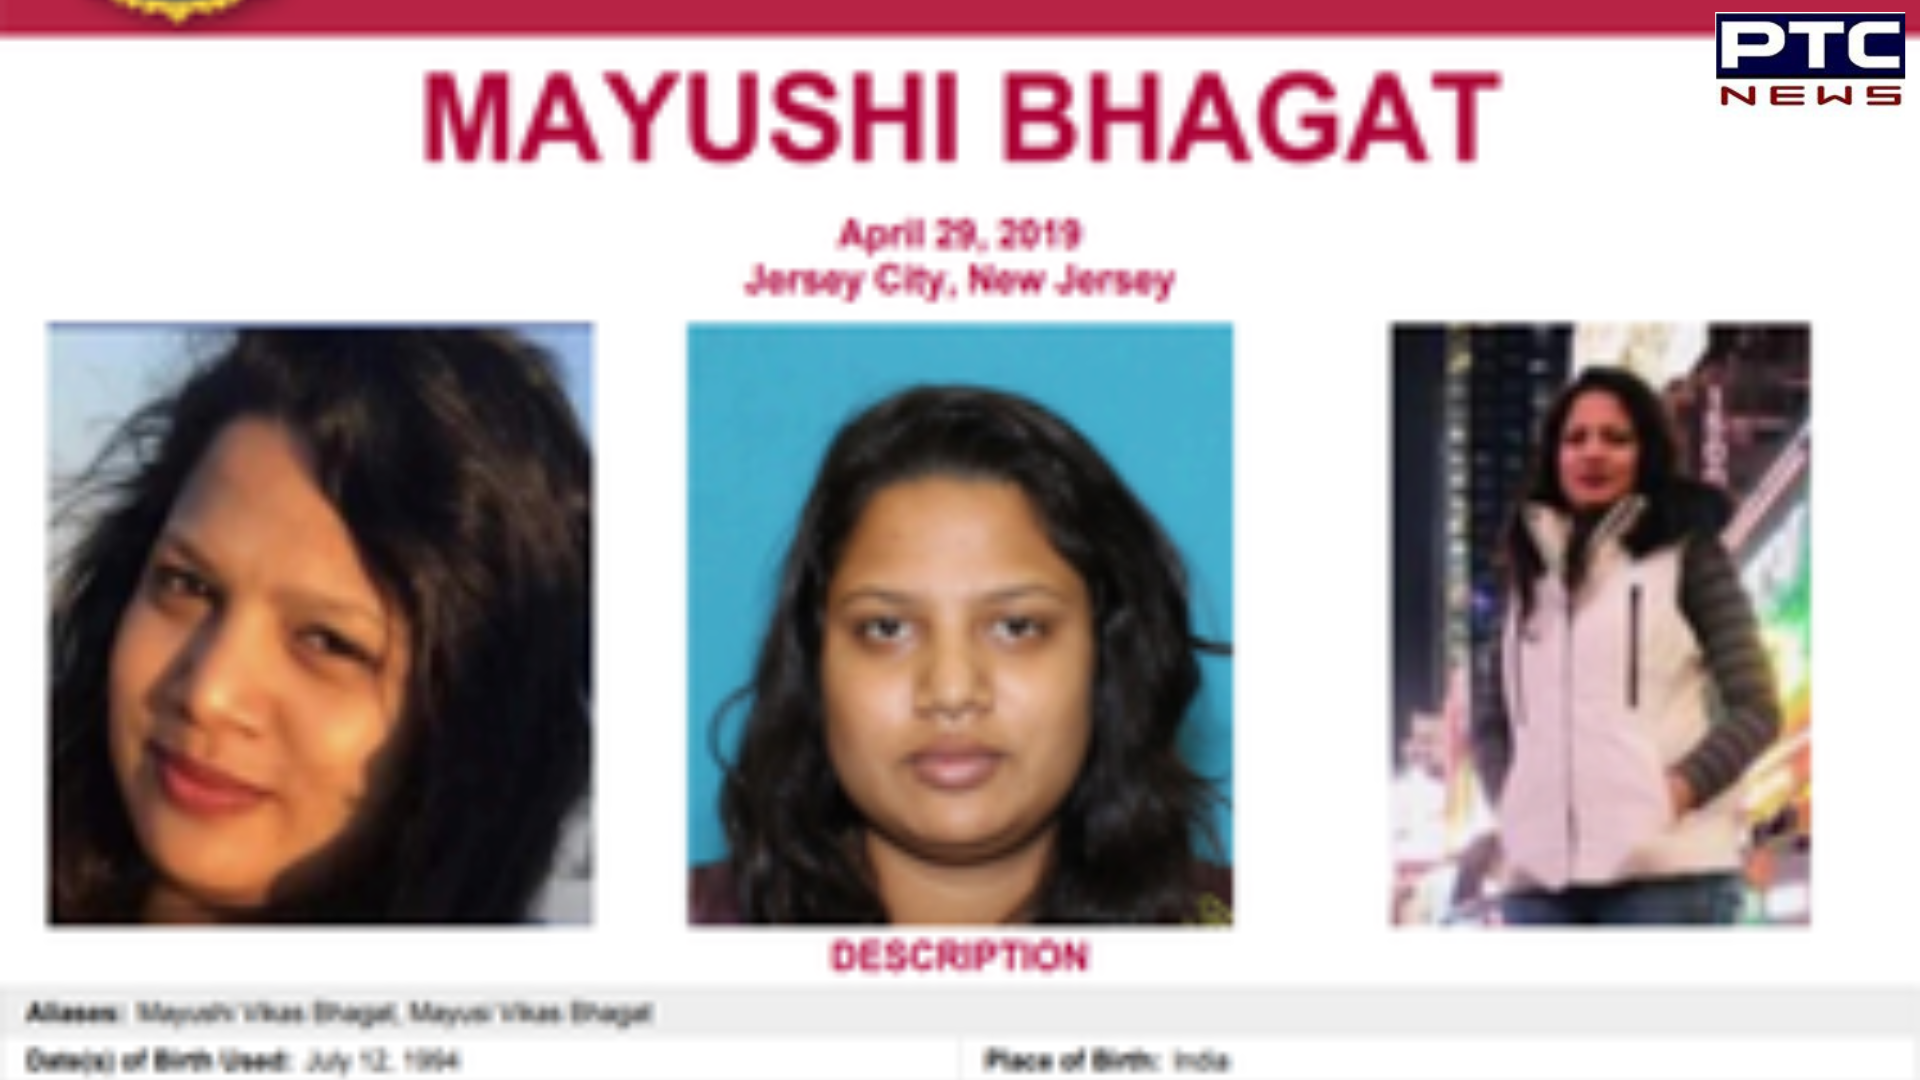 FBI offers reward of $10,000 for info about Indian student who went missing for over 4 years from New Jersey